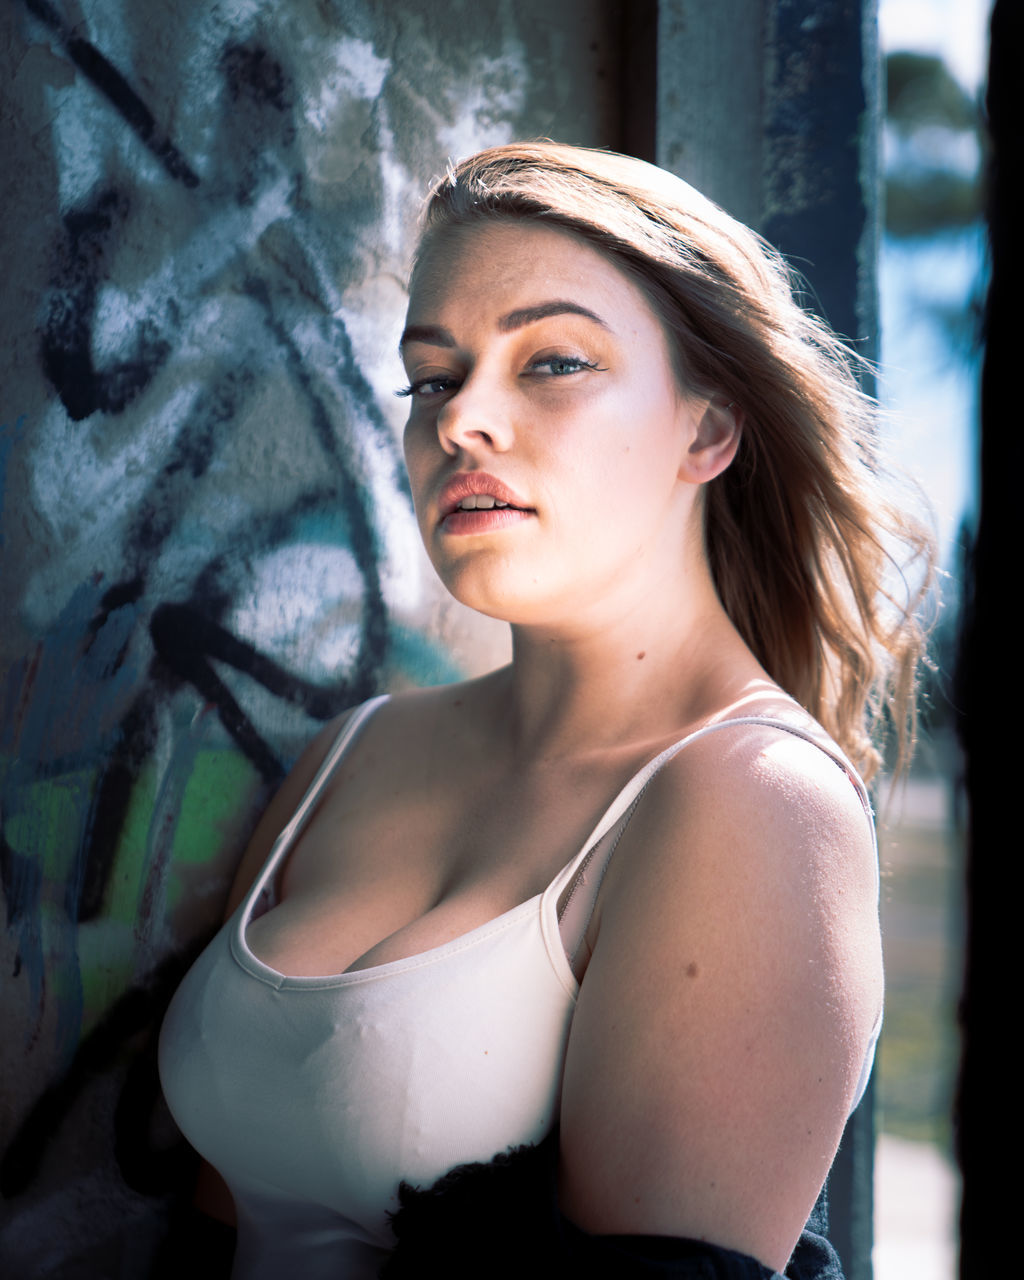 one person, women, adult, young adult, female, portrait, fashion, hairstyle, person, clothing, photo shoot, contemplation, looking, long hair, nature, lifestyles, outdoors, portrait photography, serious, graffiti, looking at camera, waist up, human face, emotion